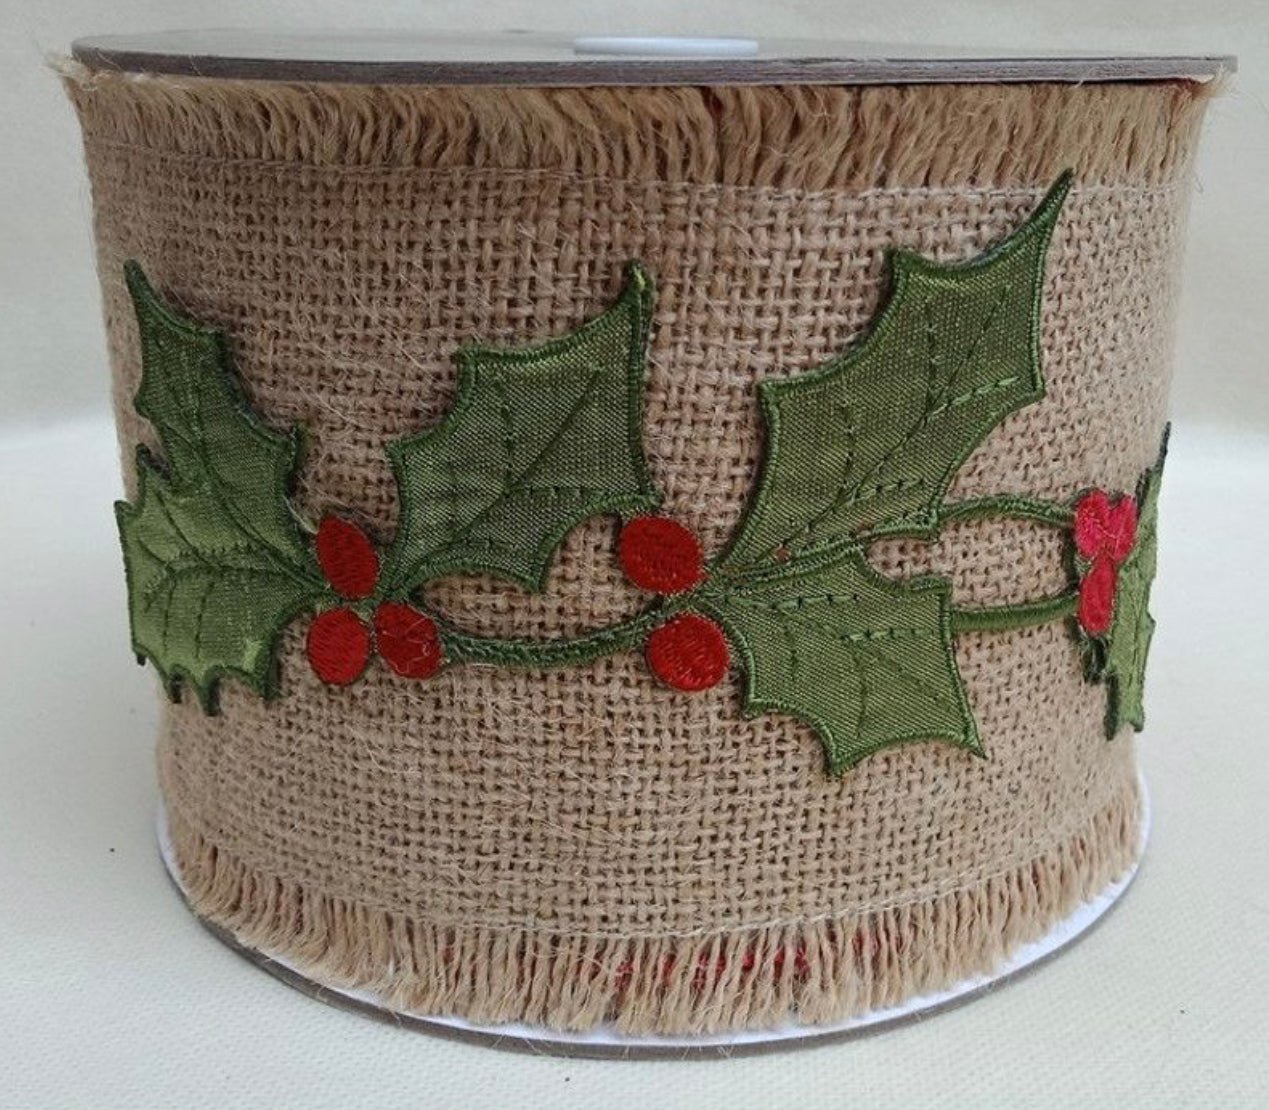 Holly and burlap wired ribbon 4” - Greenery MarketRibbons & Trim138134